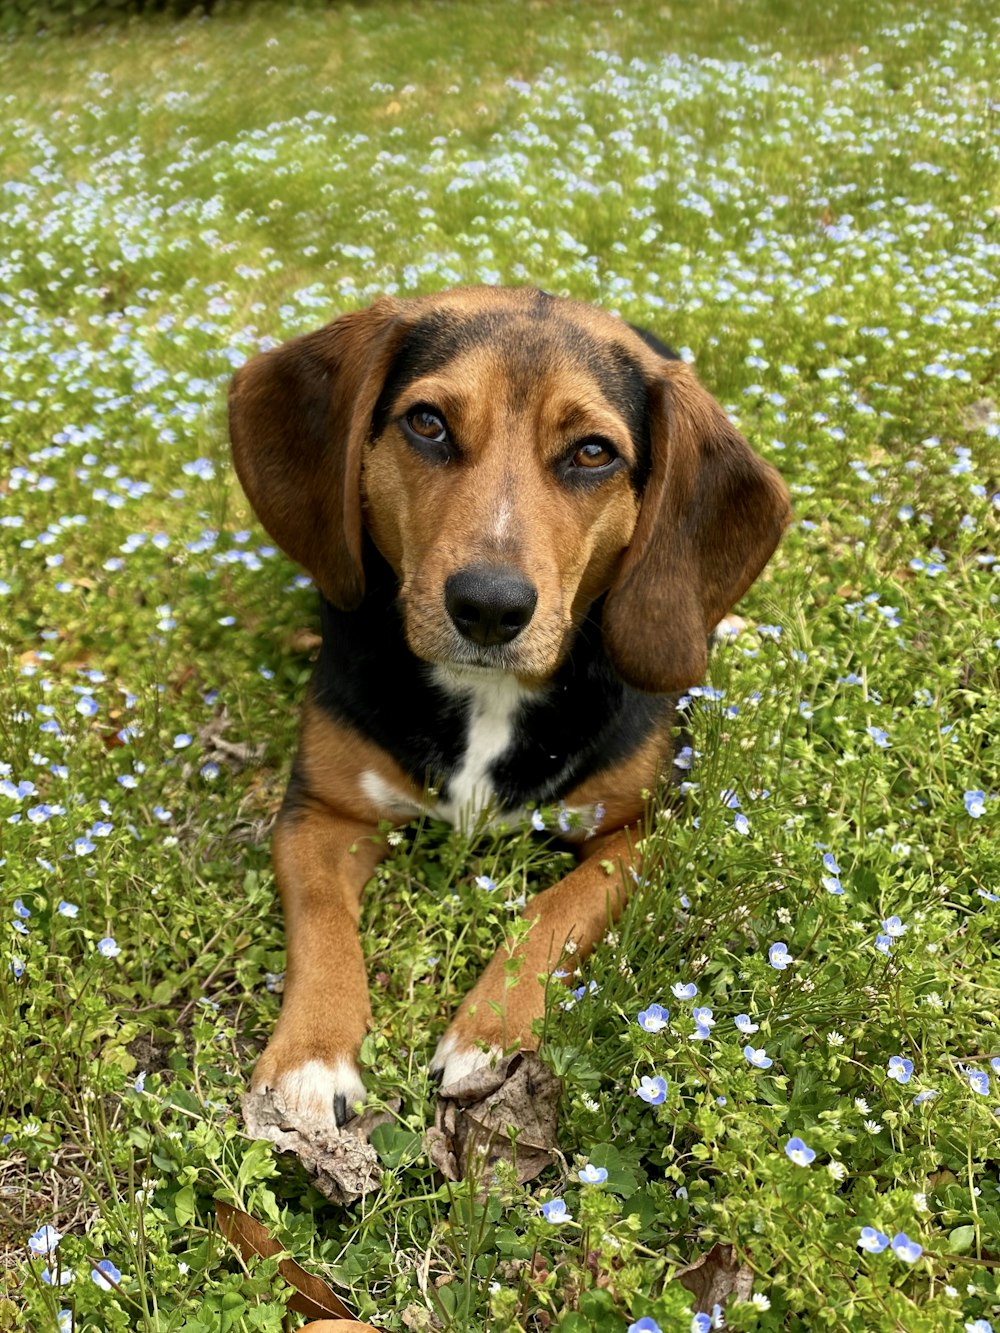 tricolor beagle on green grass field during daytime